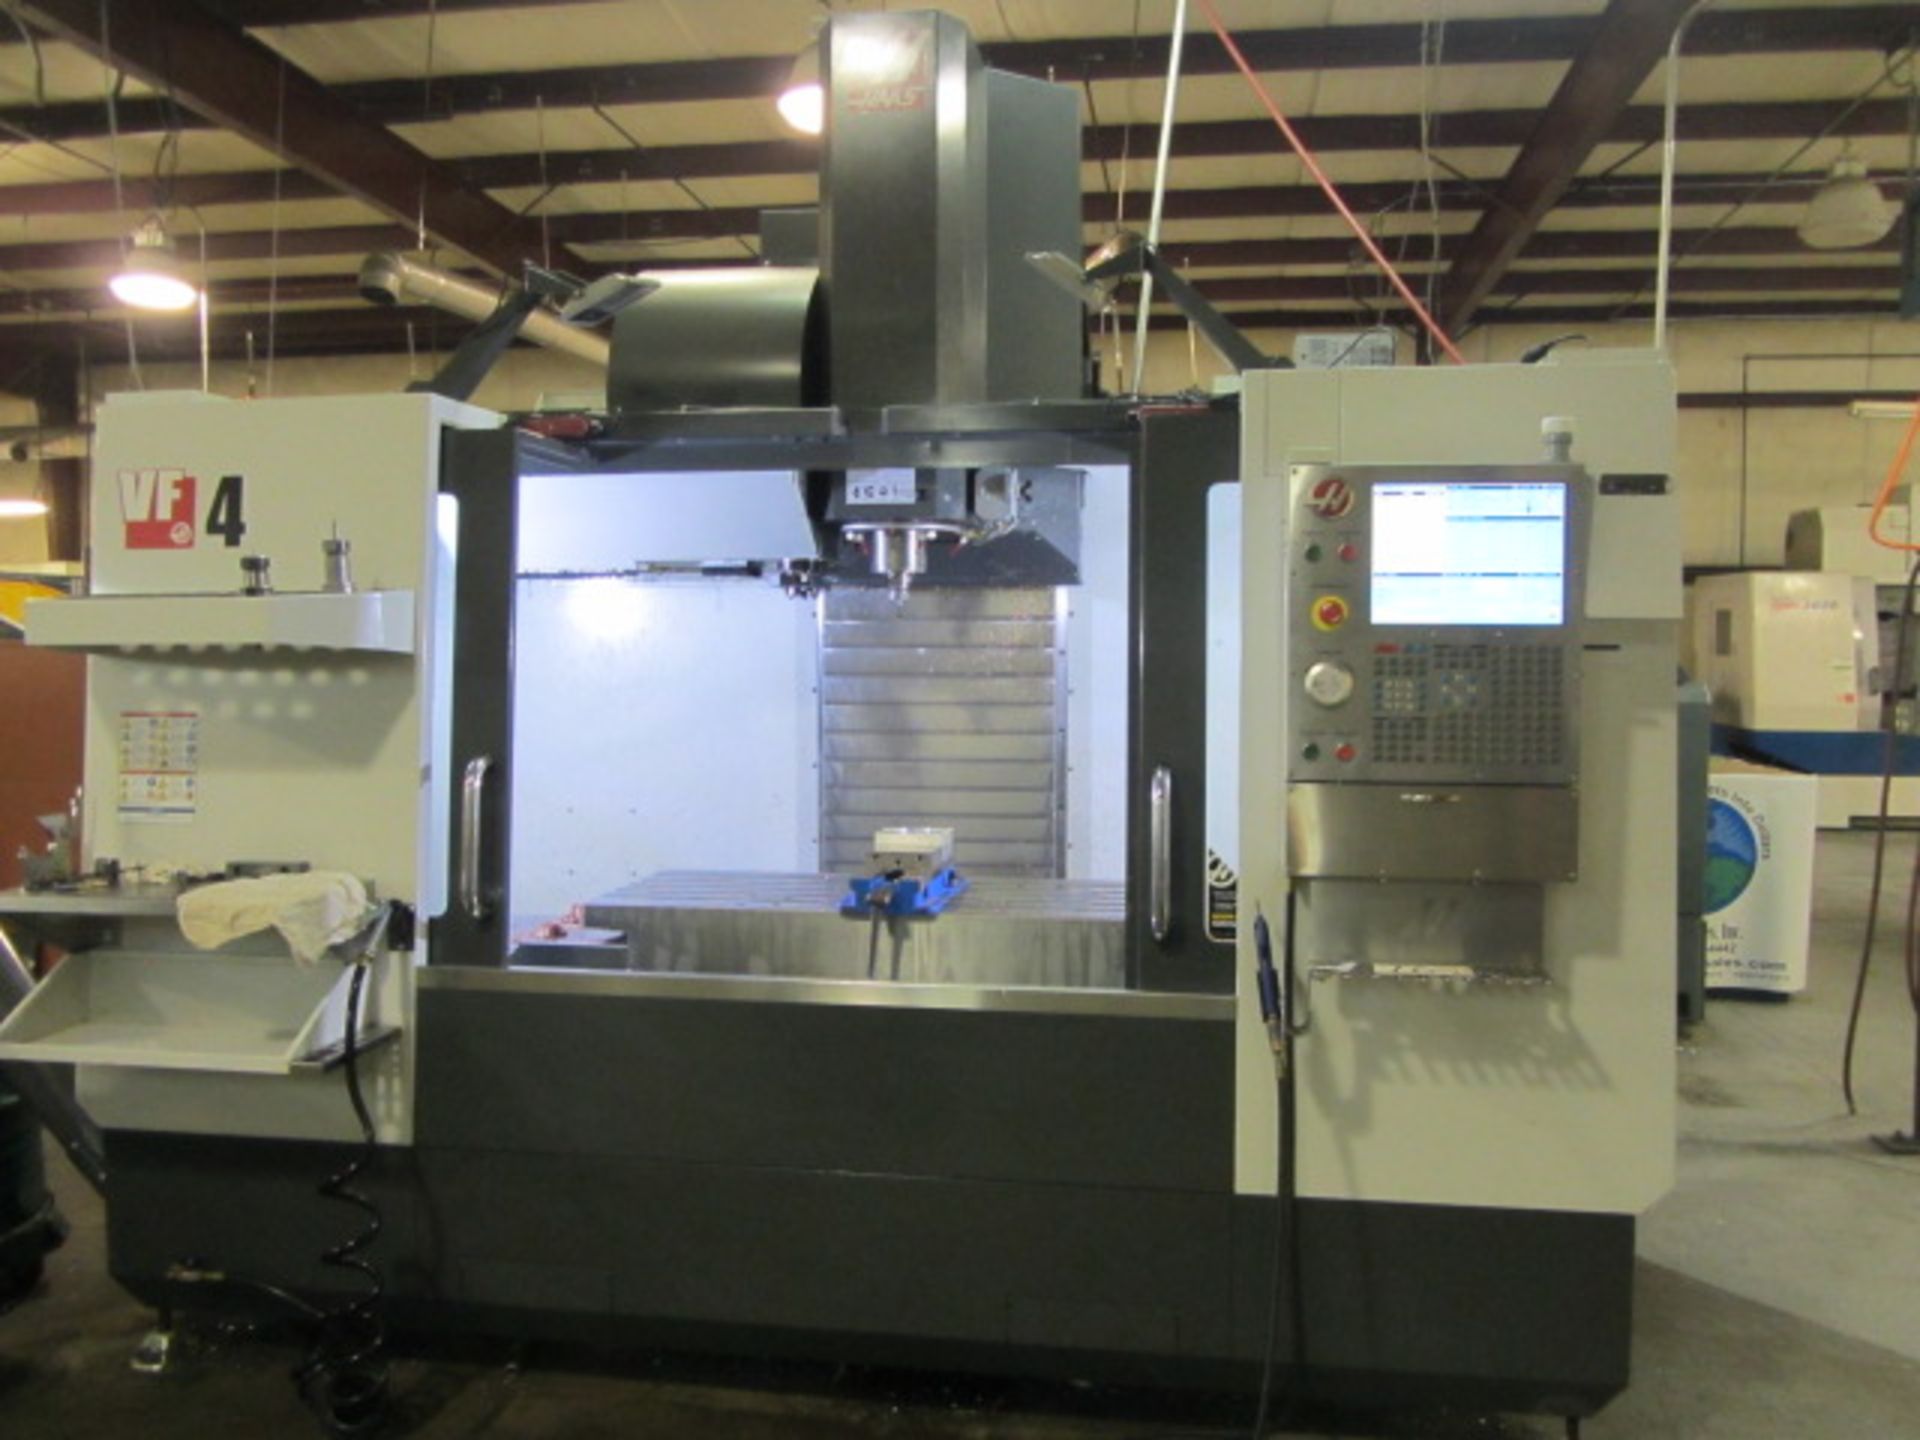 Haas VF-4 CNC Vertical Machining Center with 52'' x 20'' Table, #40 Taper Spindle Speeds to 8100 - Bild 3 aus 8